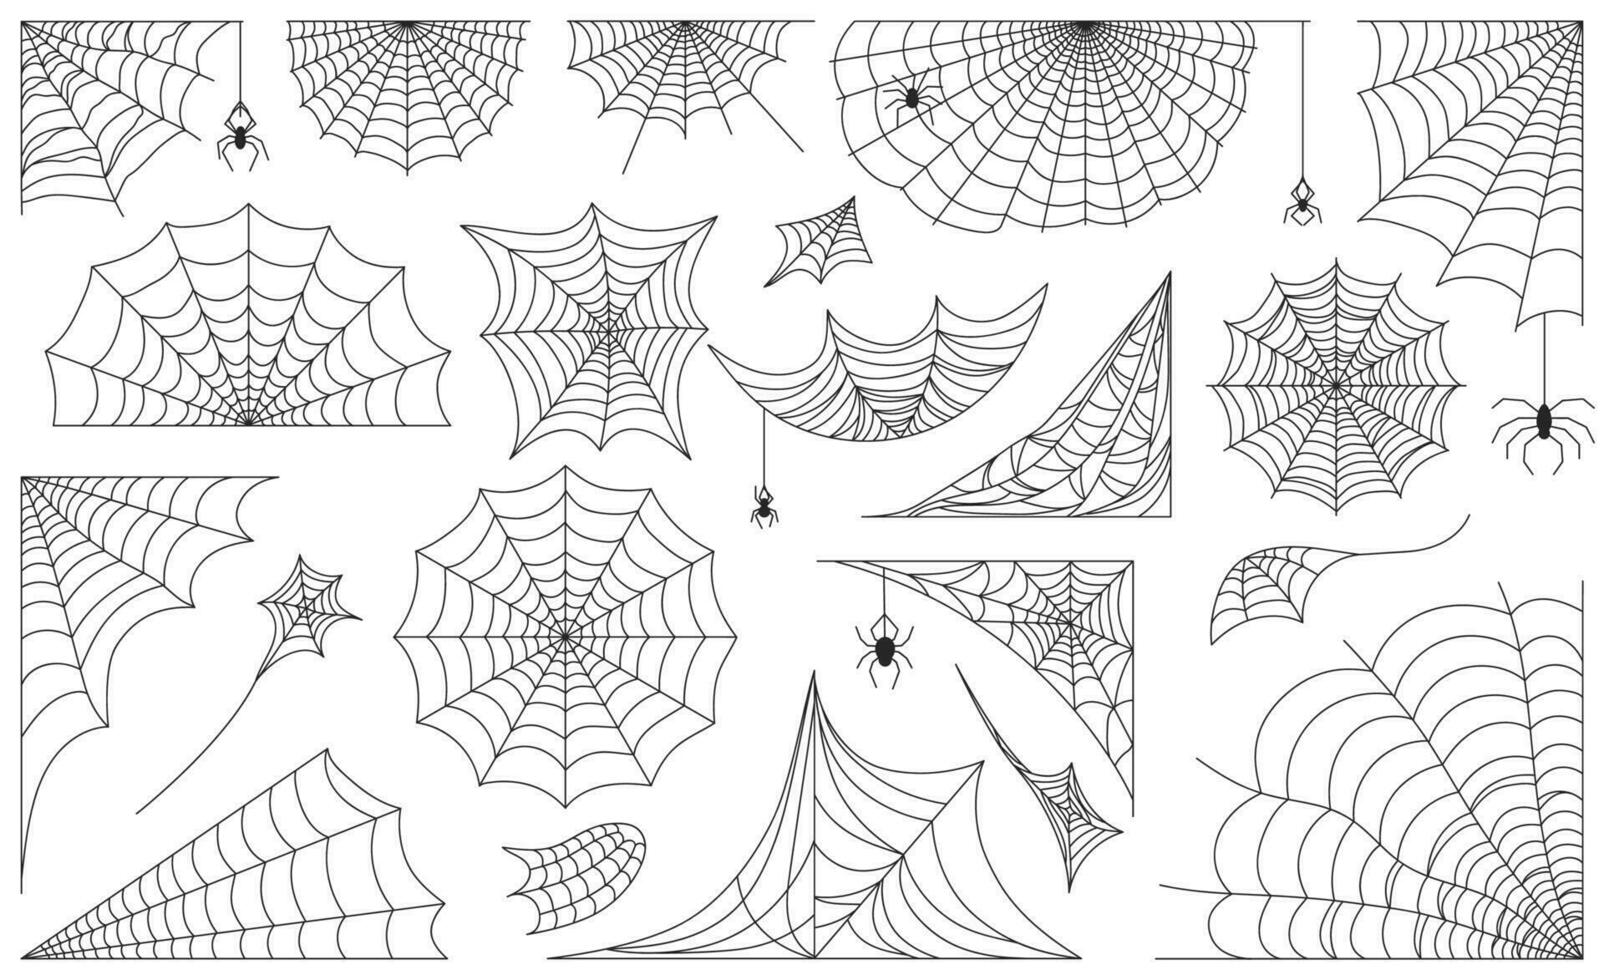 Halloween spider web, black cobweb frames, borders and corners. Scary spiderweb with spiders, decorative cobwebs silhouette vector set